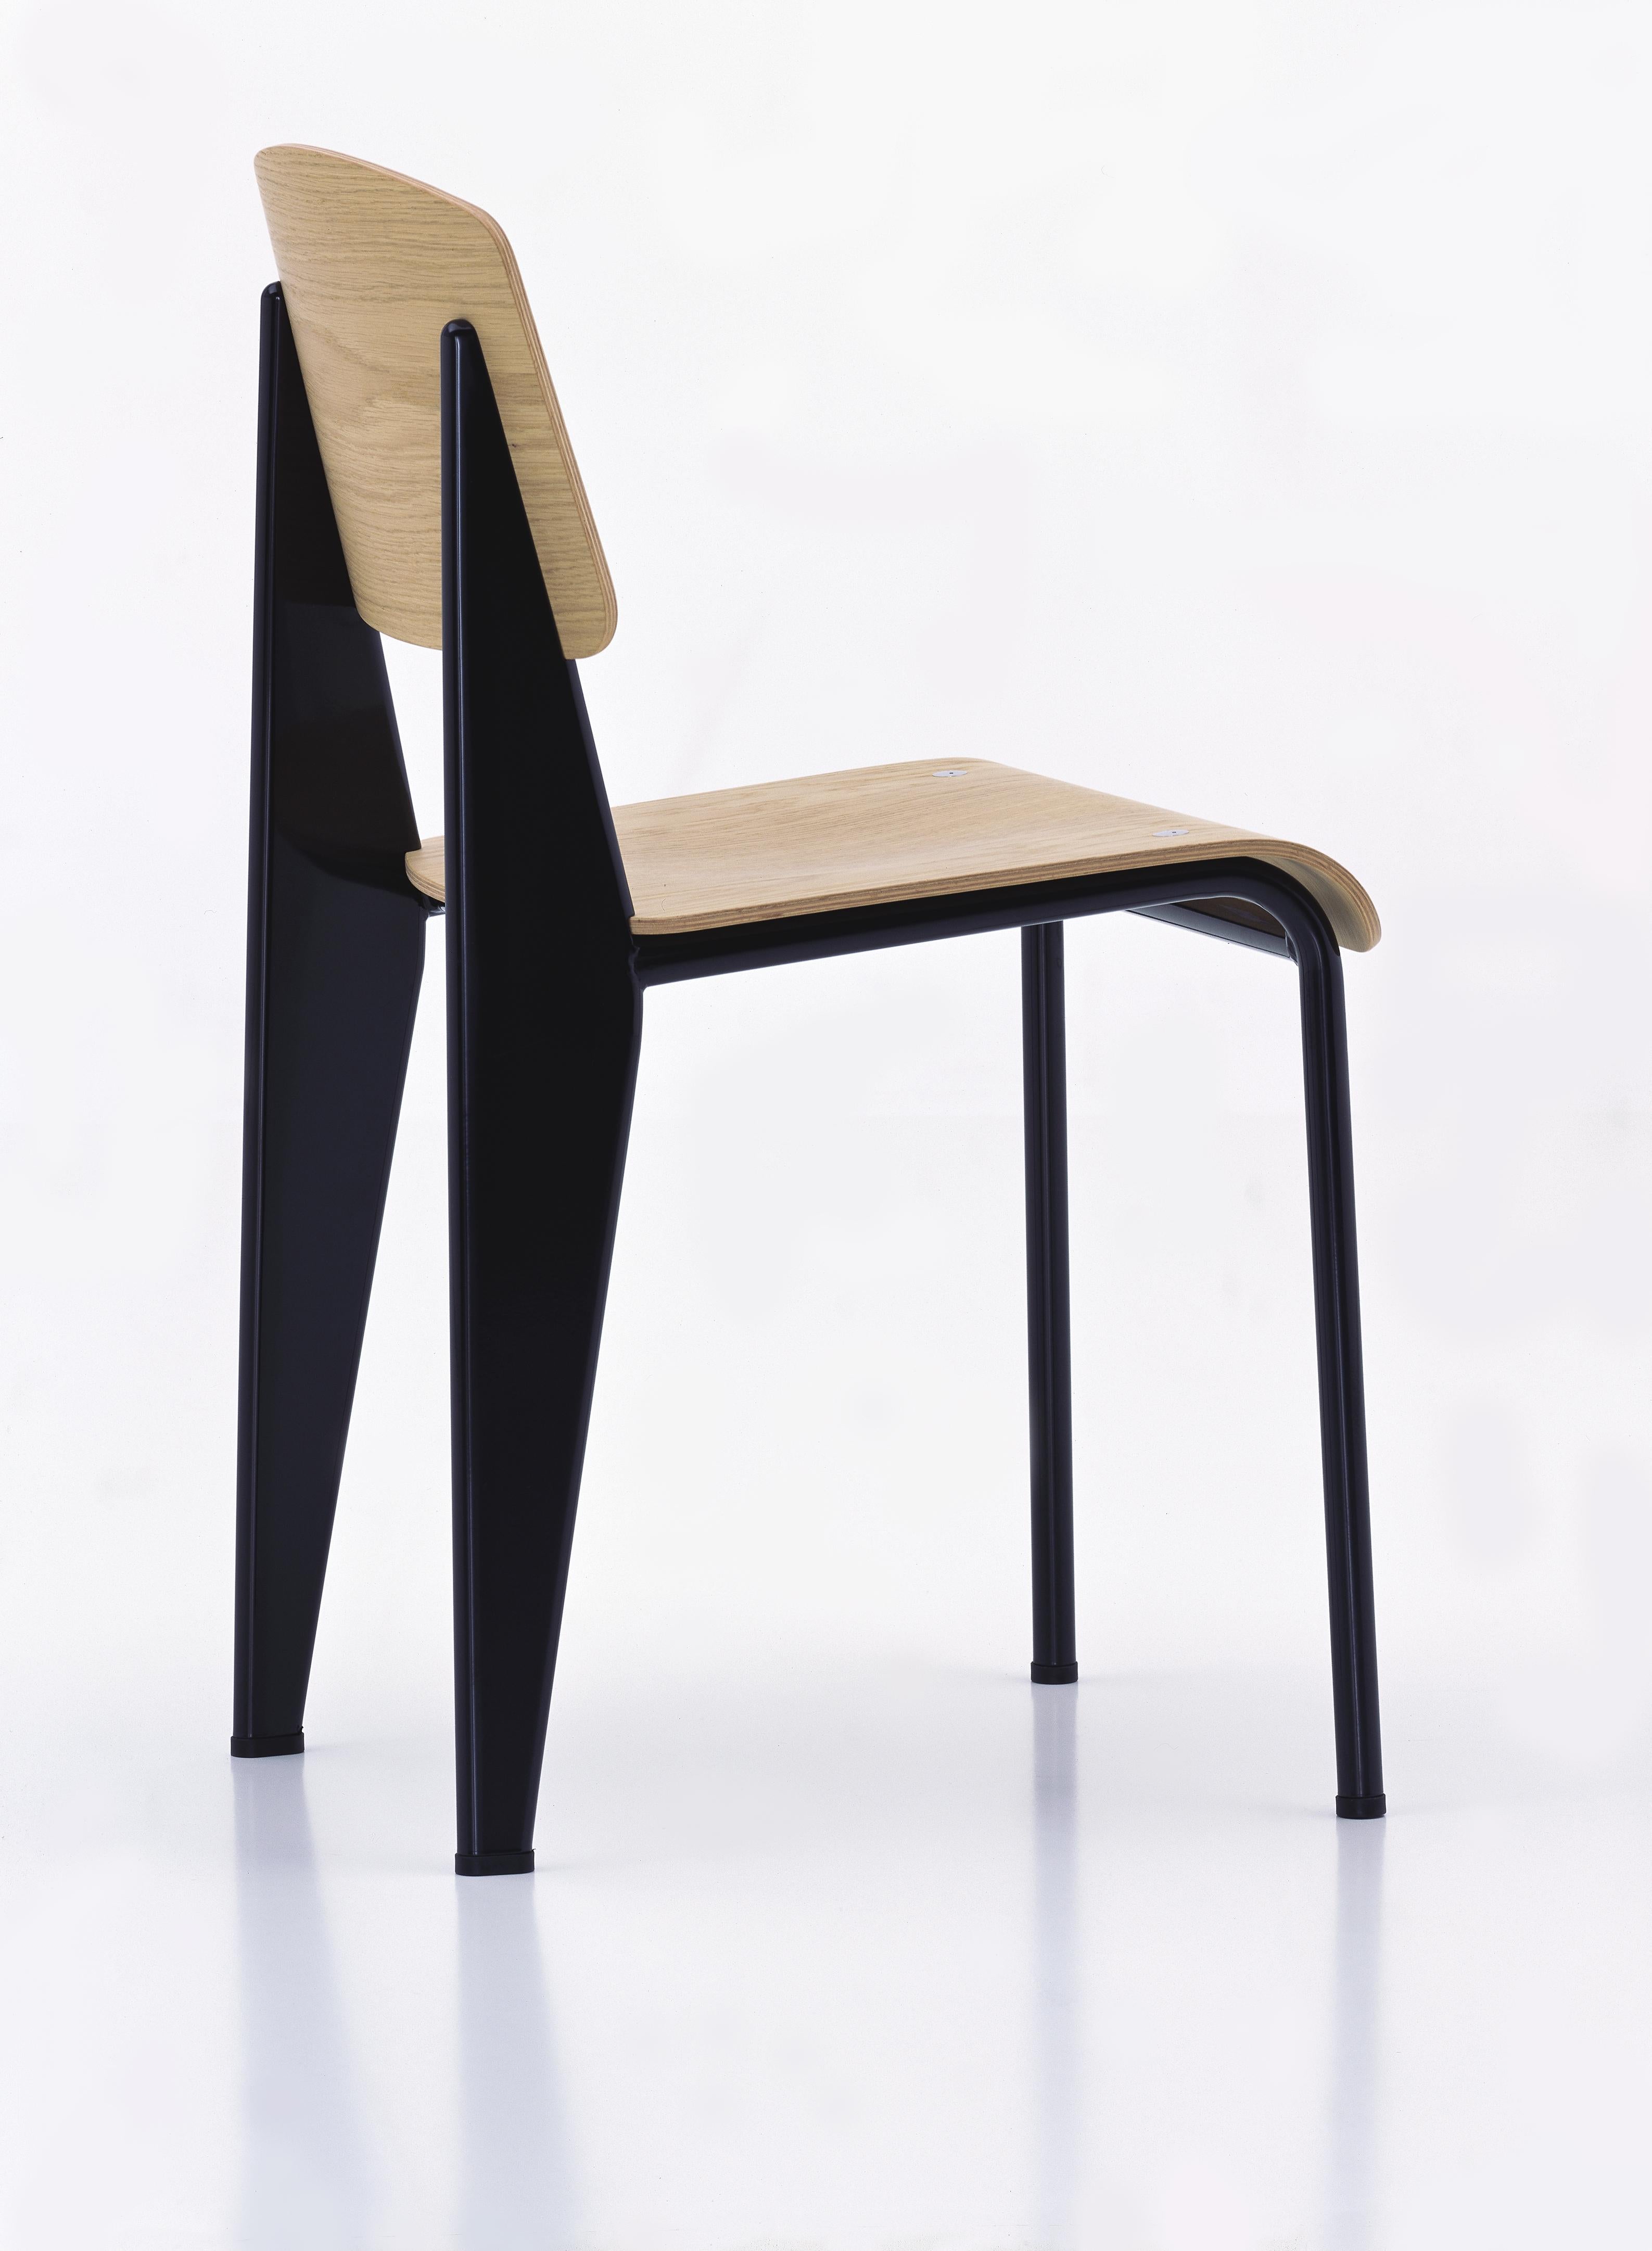 Jean Prouvé standard chair in natural oak and black metal for Vitra. The standard chair is an early masterpiece by the French designer and engineer Jean Prouvé. Originally designed in 1934, the Standard evolved into one of the most famous classics